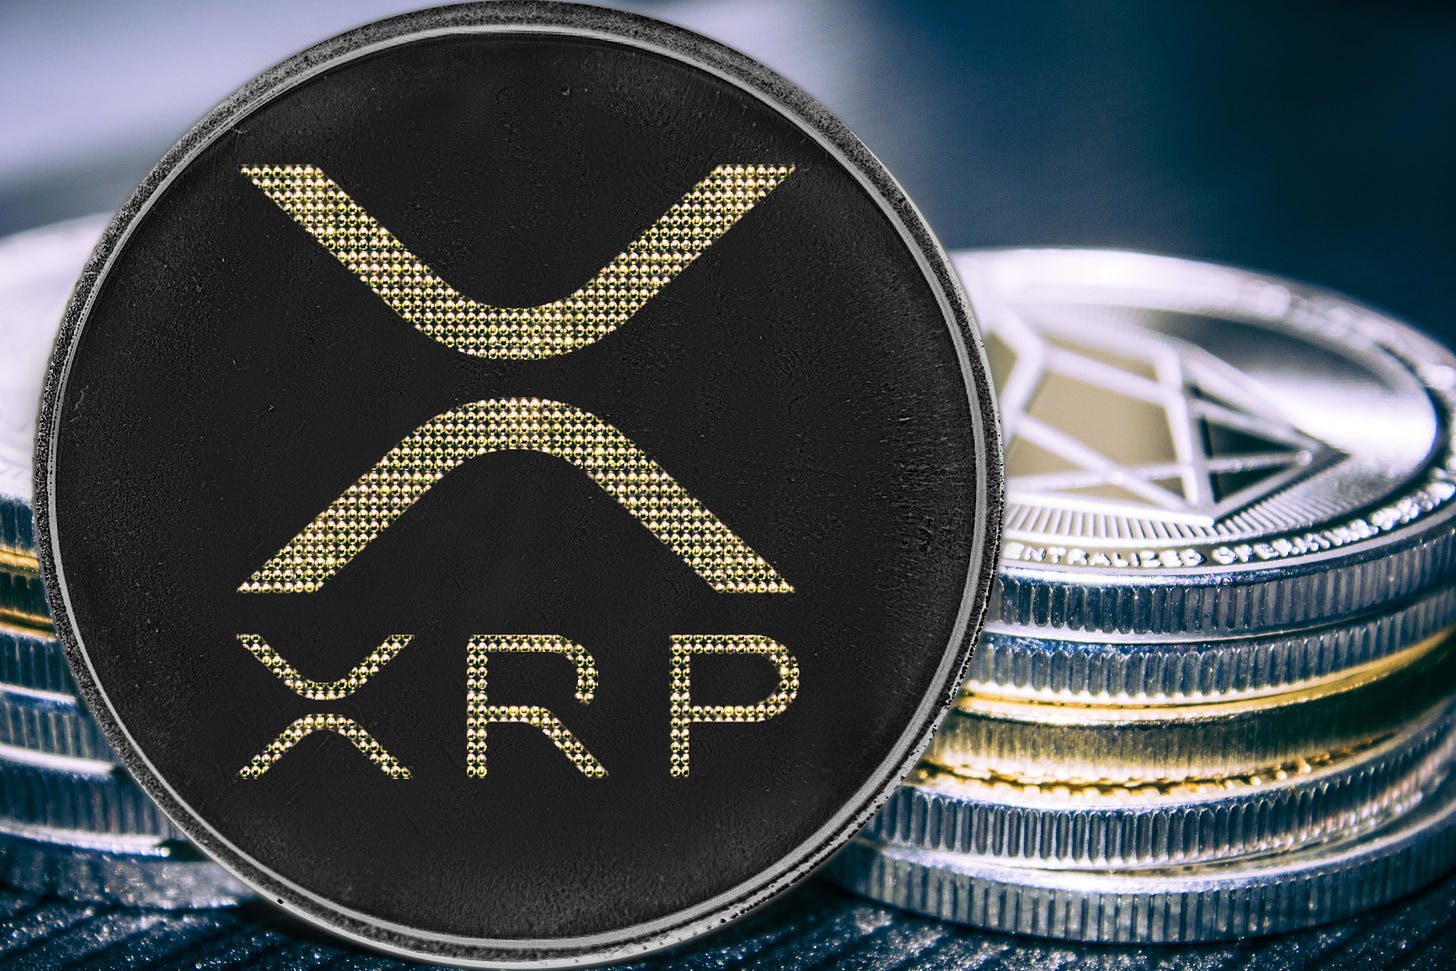 XRP Rises More Than 30% as Altcoins Piggyback on Bitcoin's Wave - CoinDesk